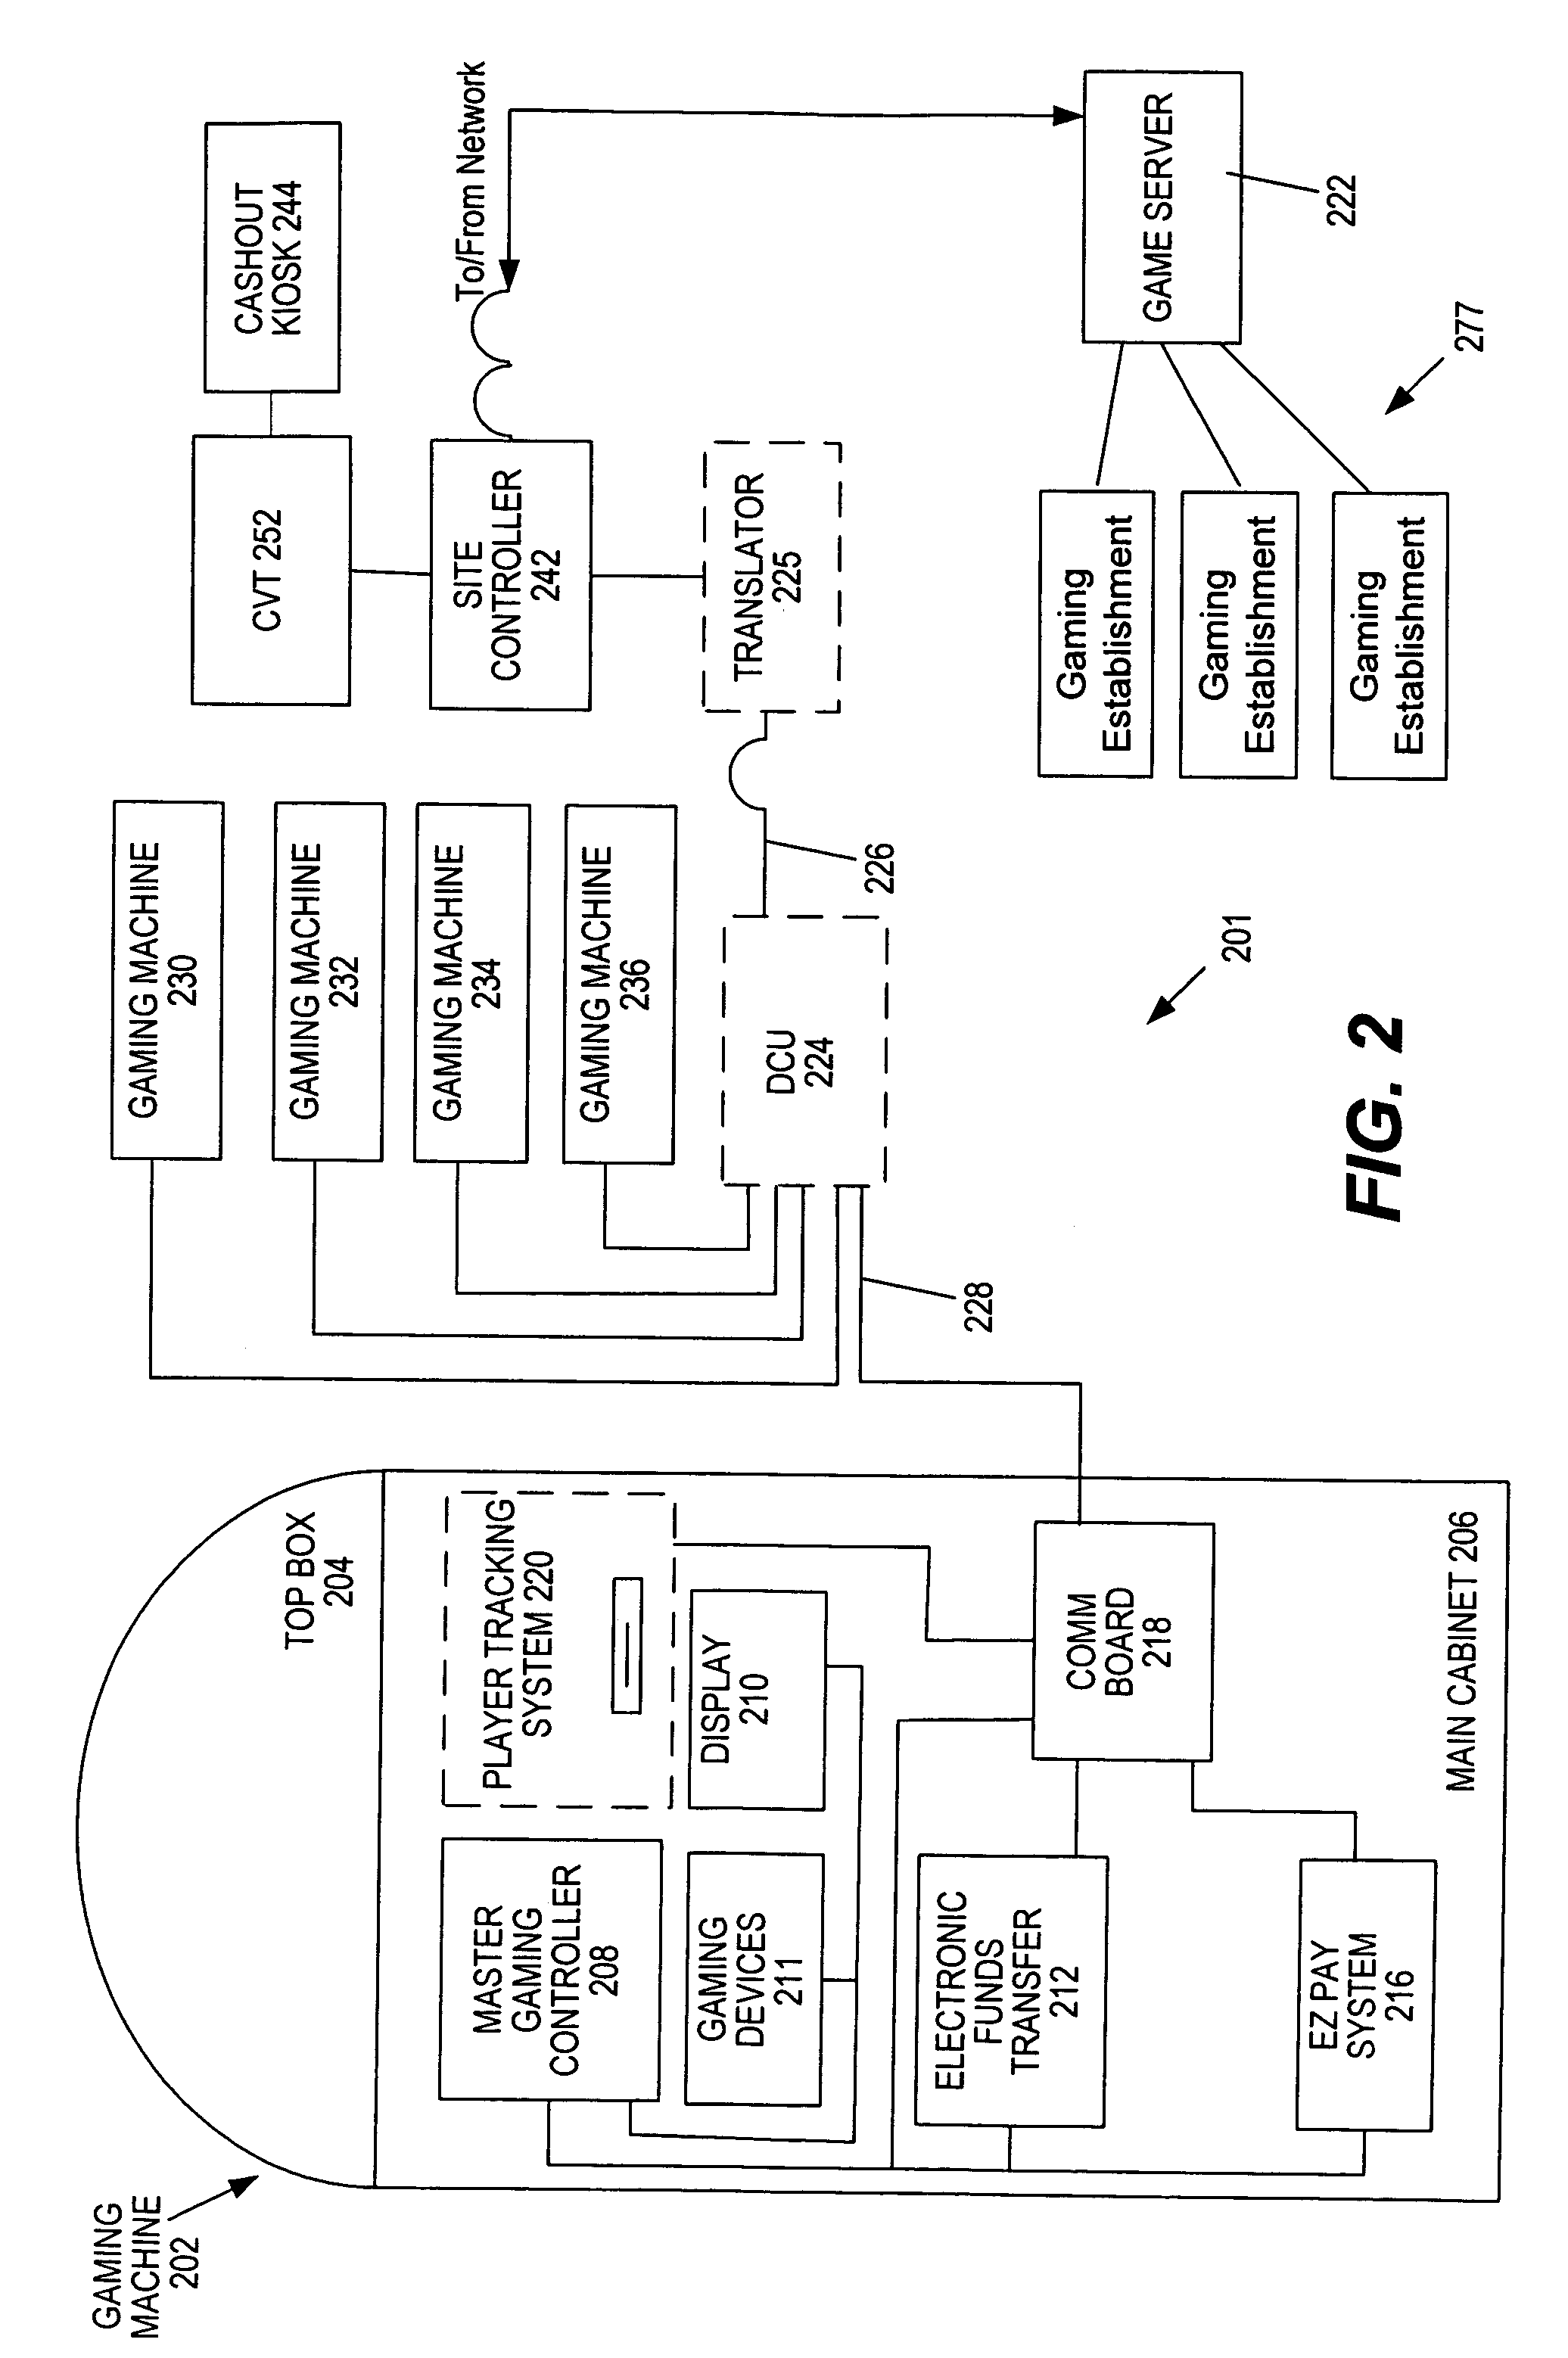 Method and apparatus for registering a mobile device with a gaming machine